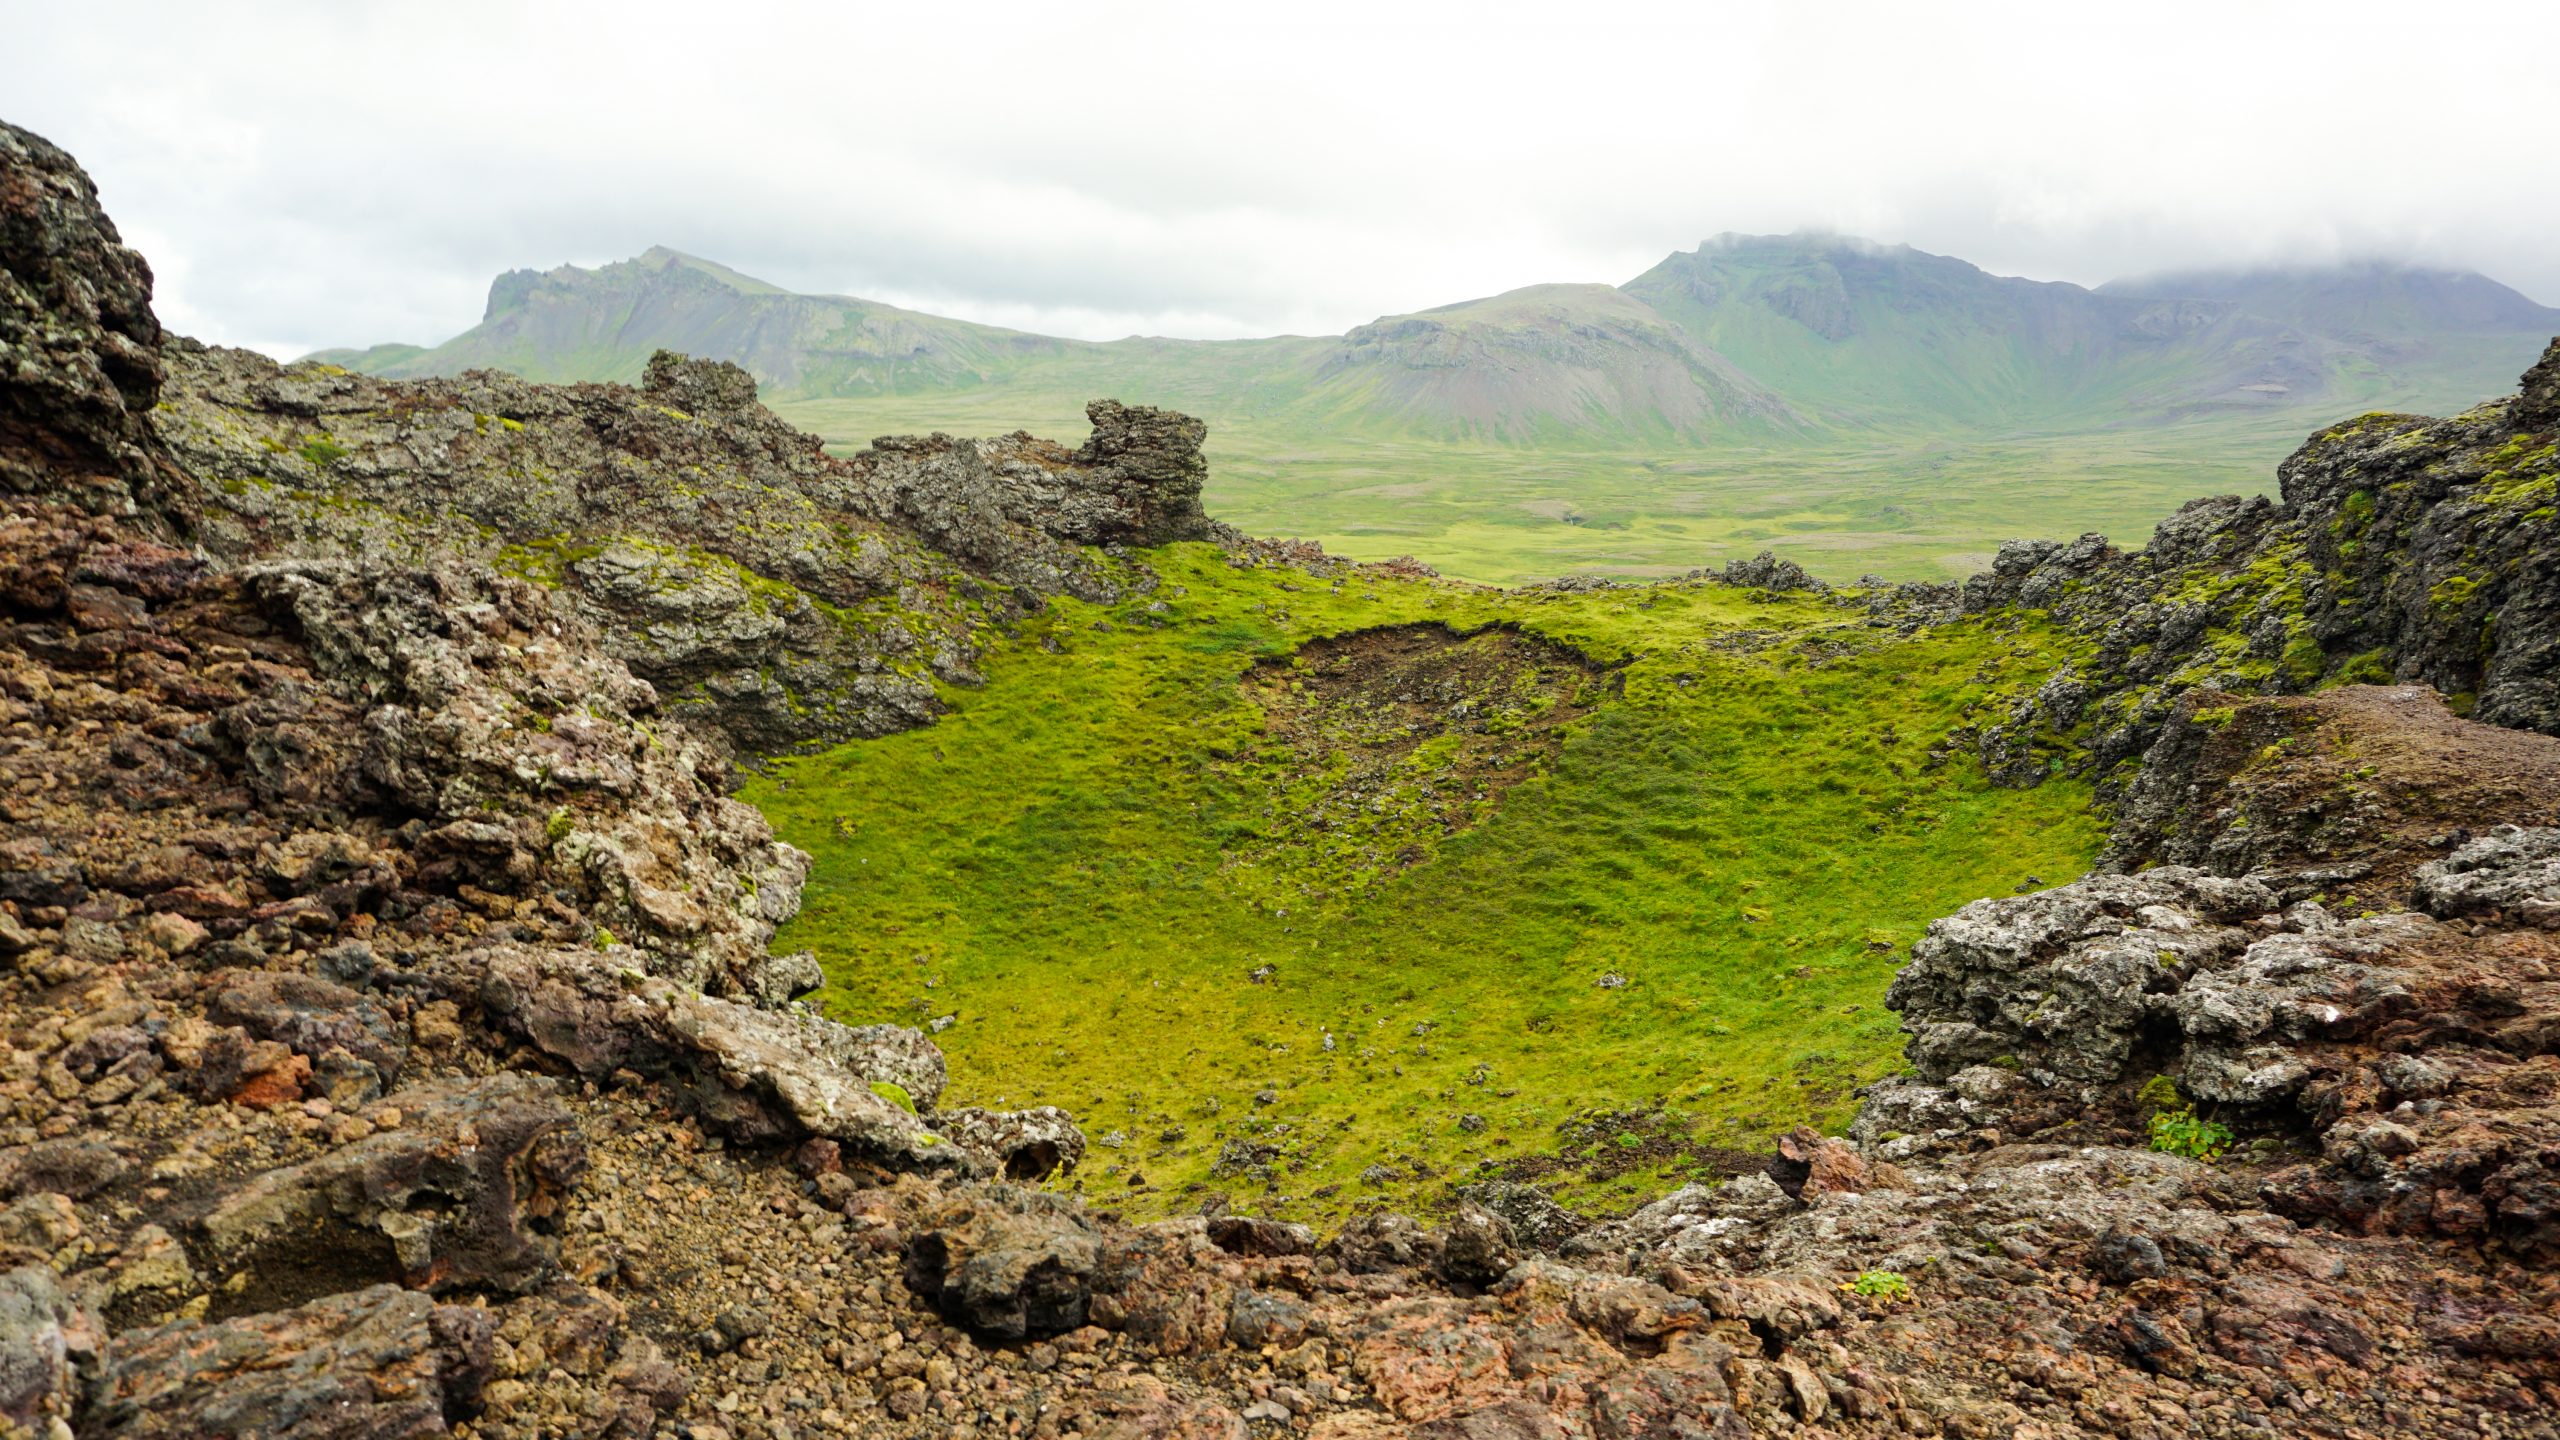 The top of a volcano crater surrounded by green vegetation